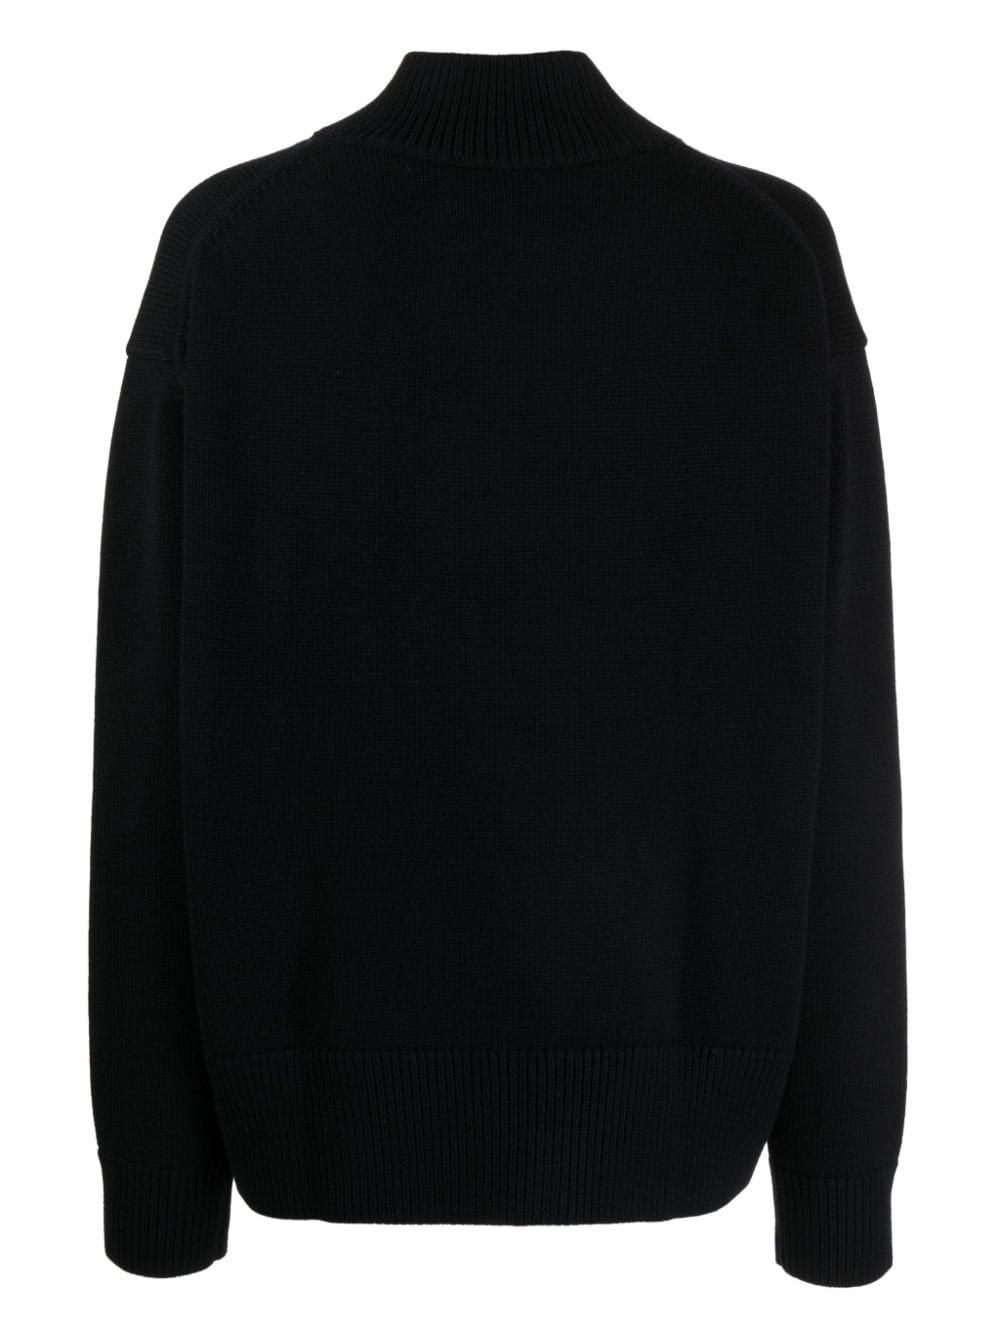 crossover-neck knitted jumper - 2